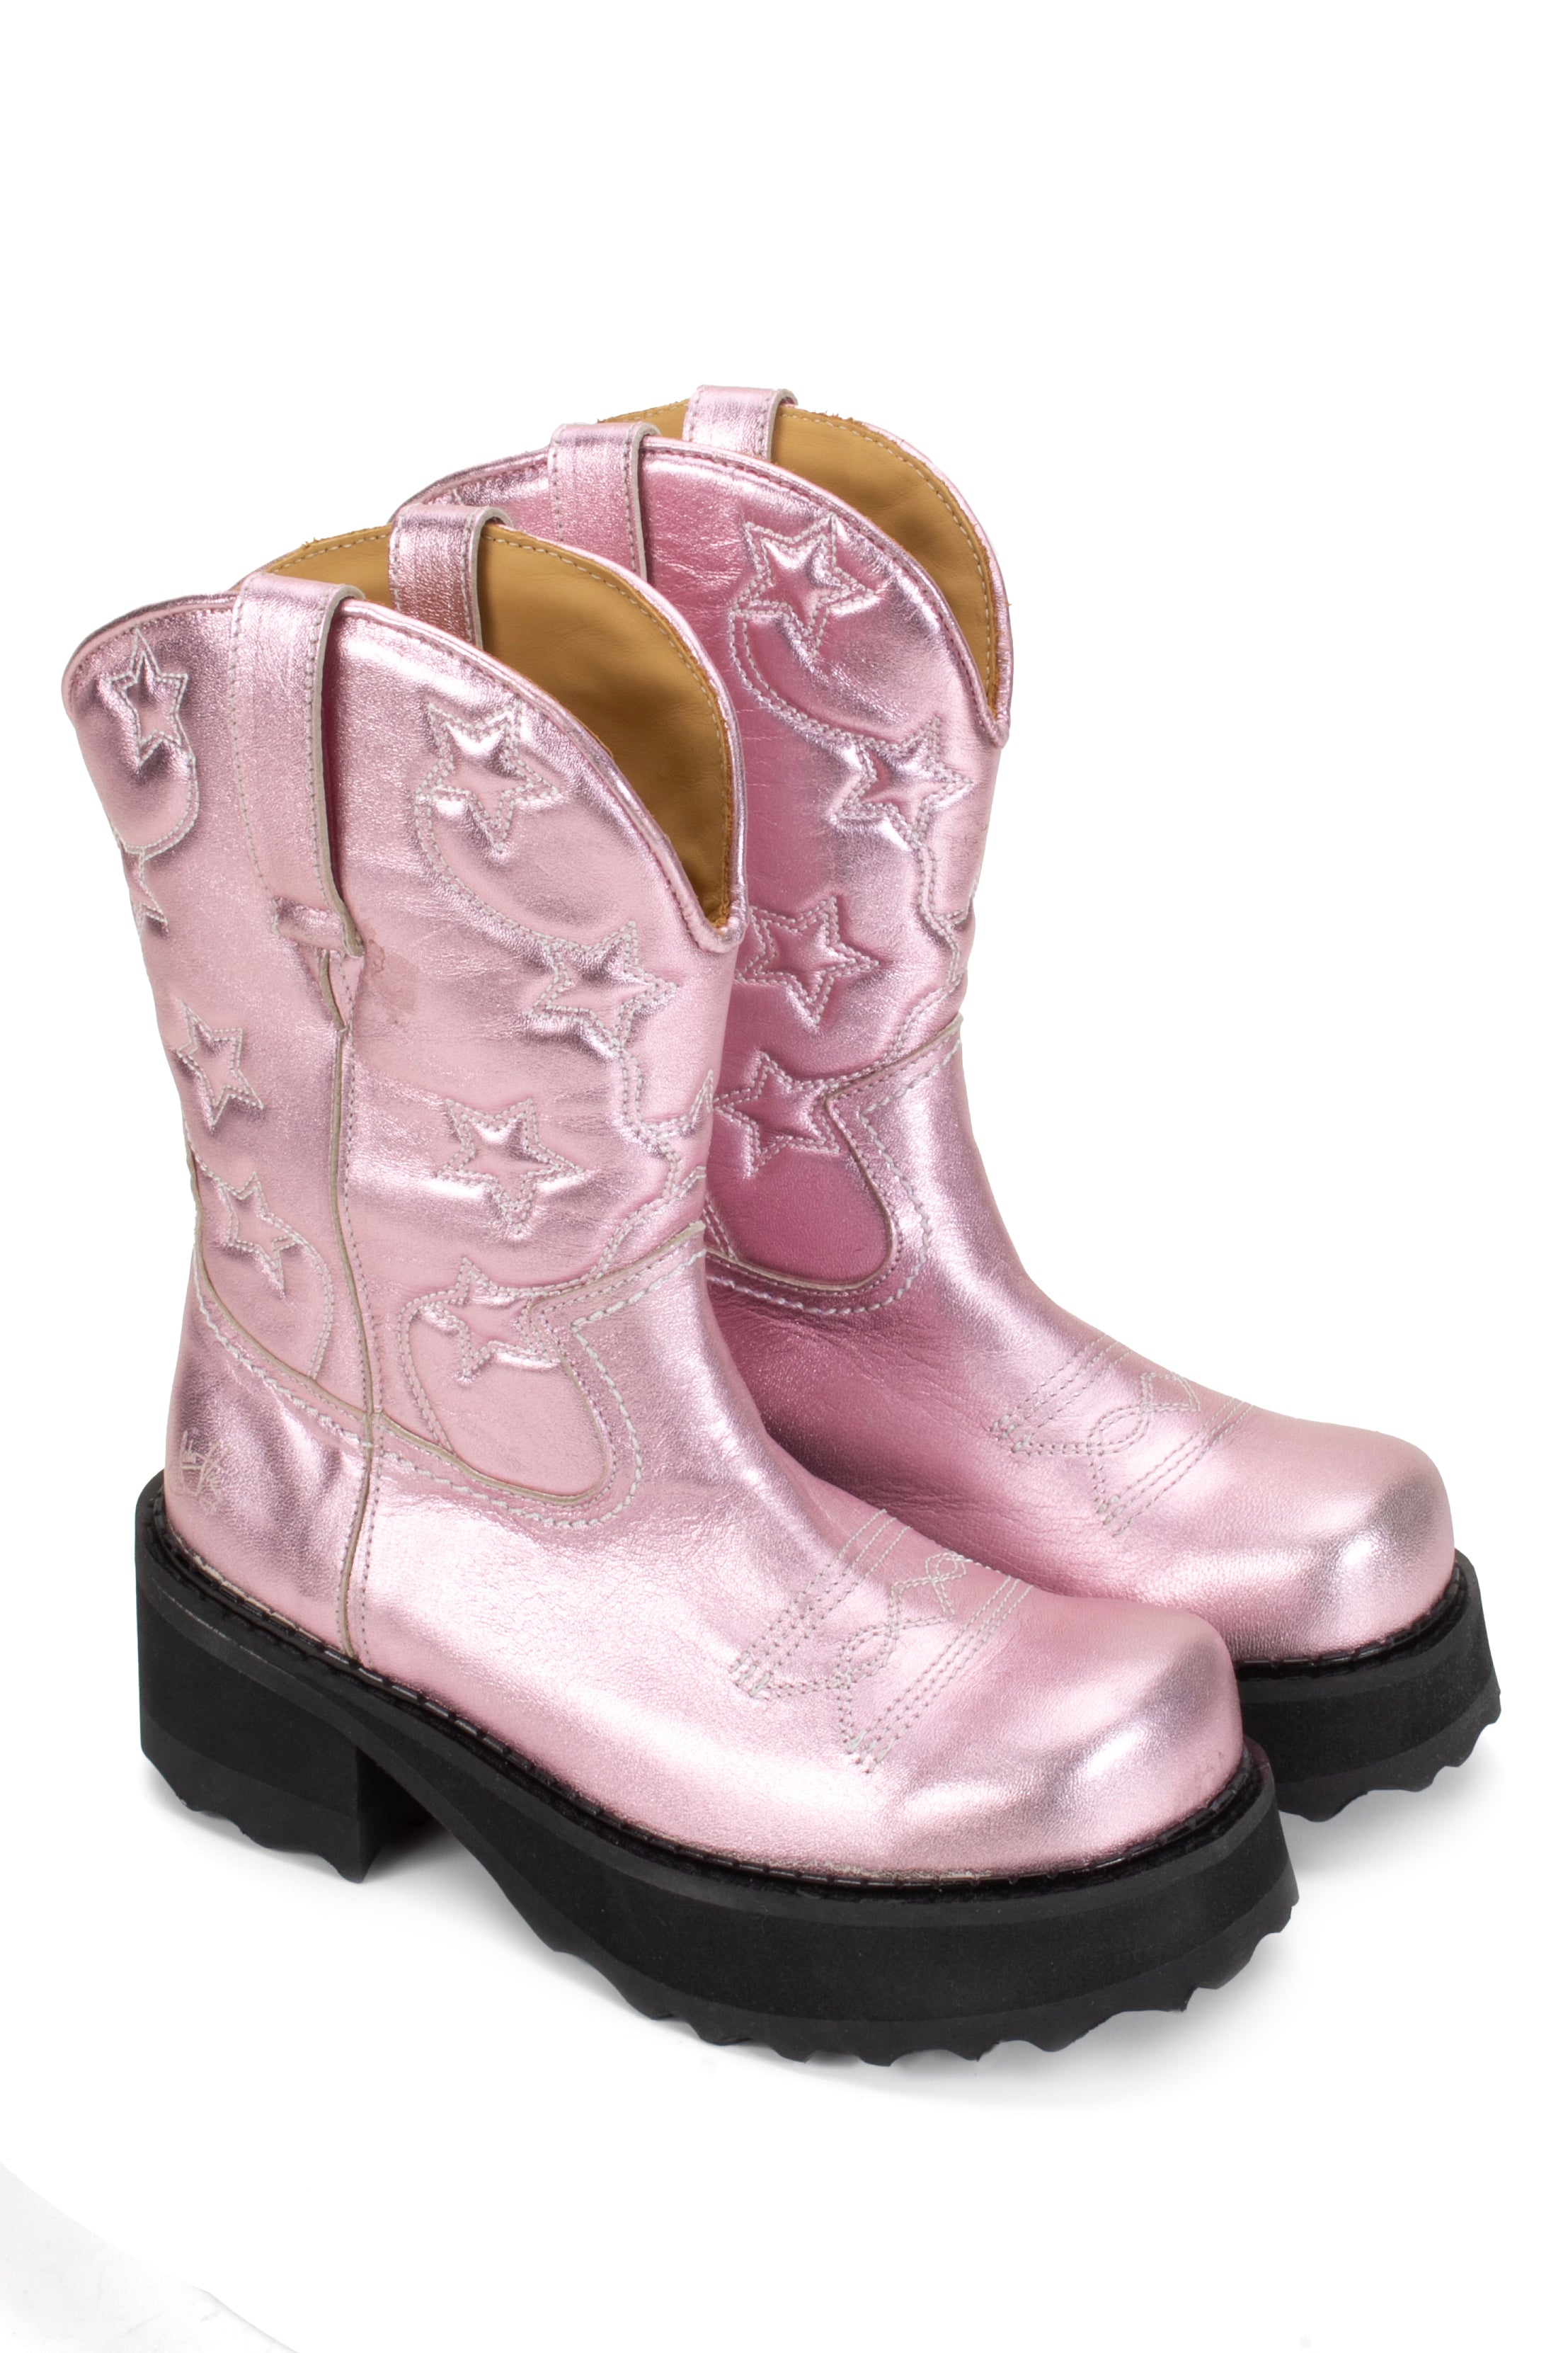 The Anna Sui x John Fluevog Ankle Cowboy Boot, are a pair of pink-colored cowboy-style boots with a high black sole